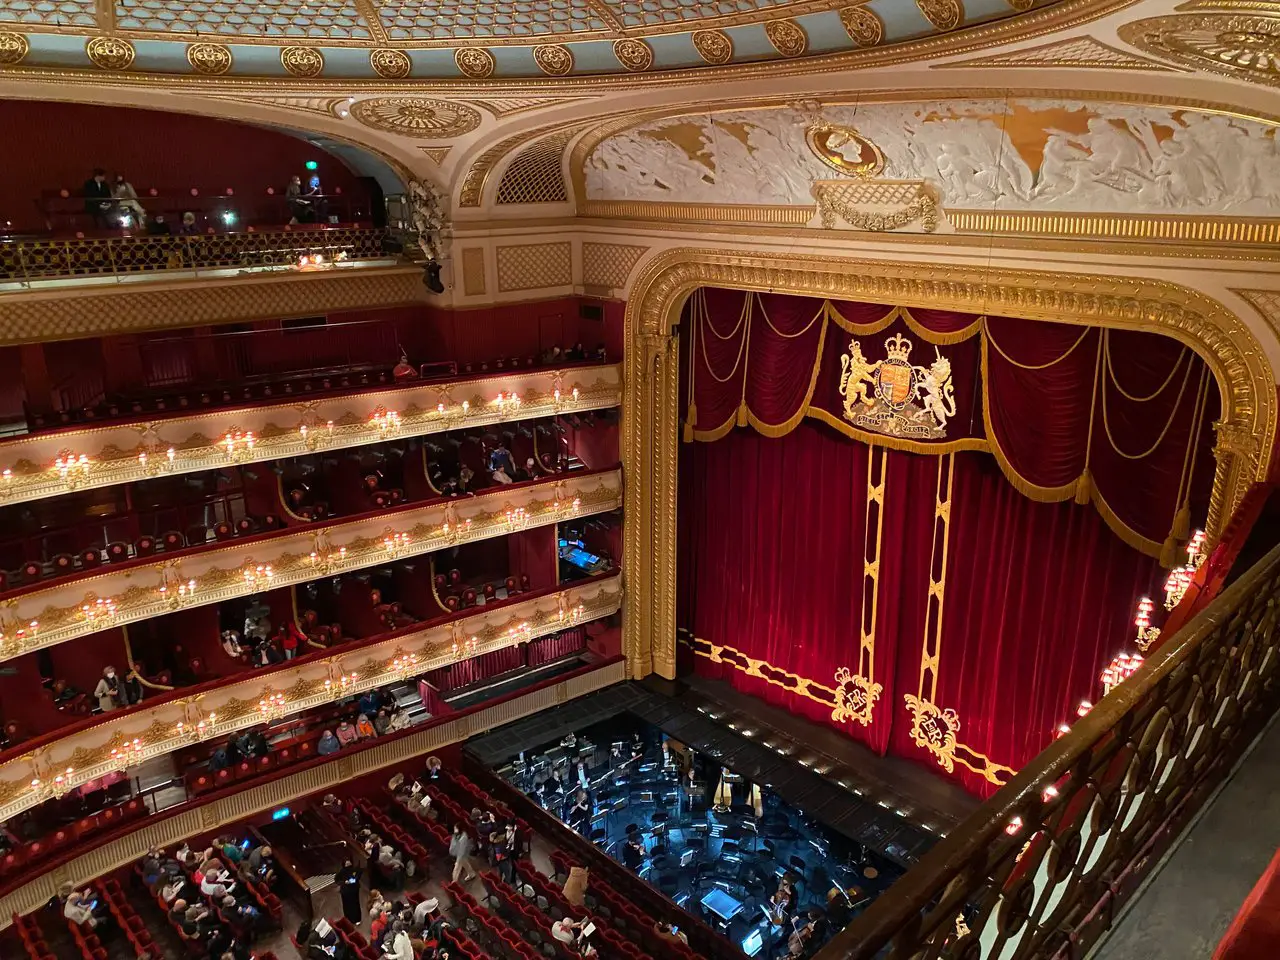 Inside the Royal Opera House in London